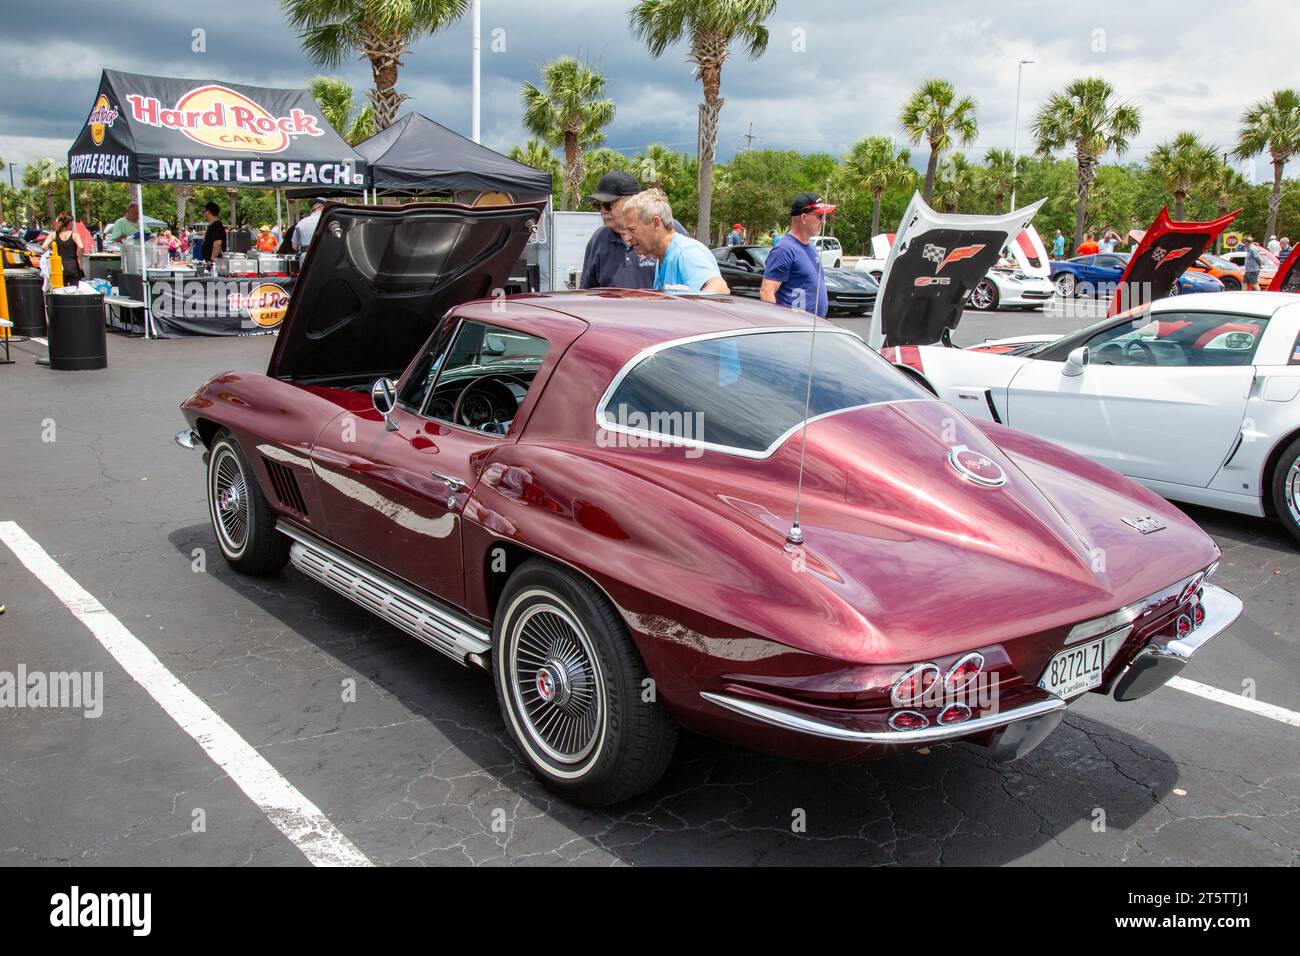 Men inspect an antique maroon 1967 Chevrolet Corvette coupe sports car at a car show in Myrtle Beach, South Carolina, USA. Stock Photo